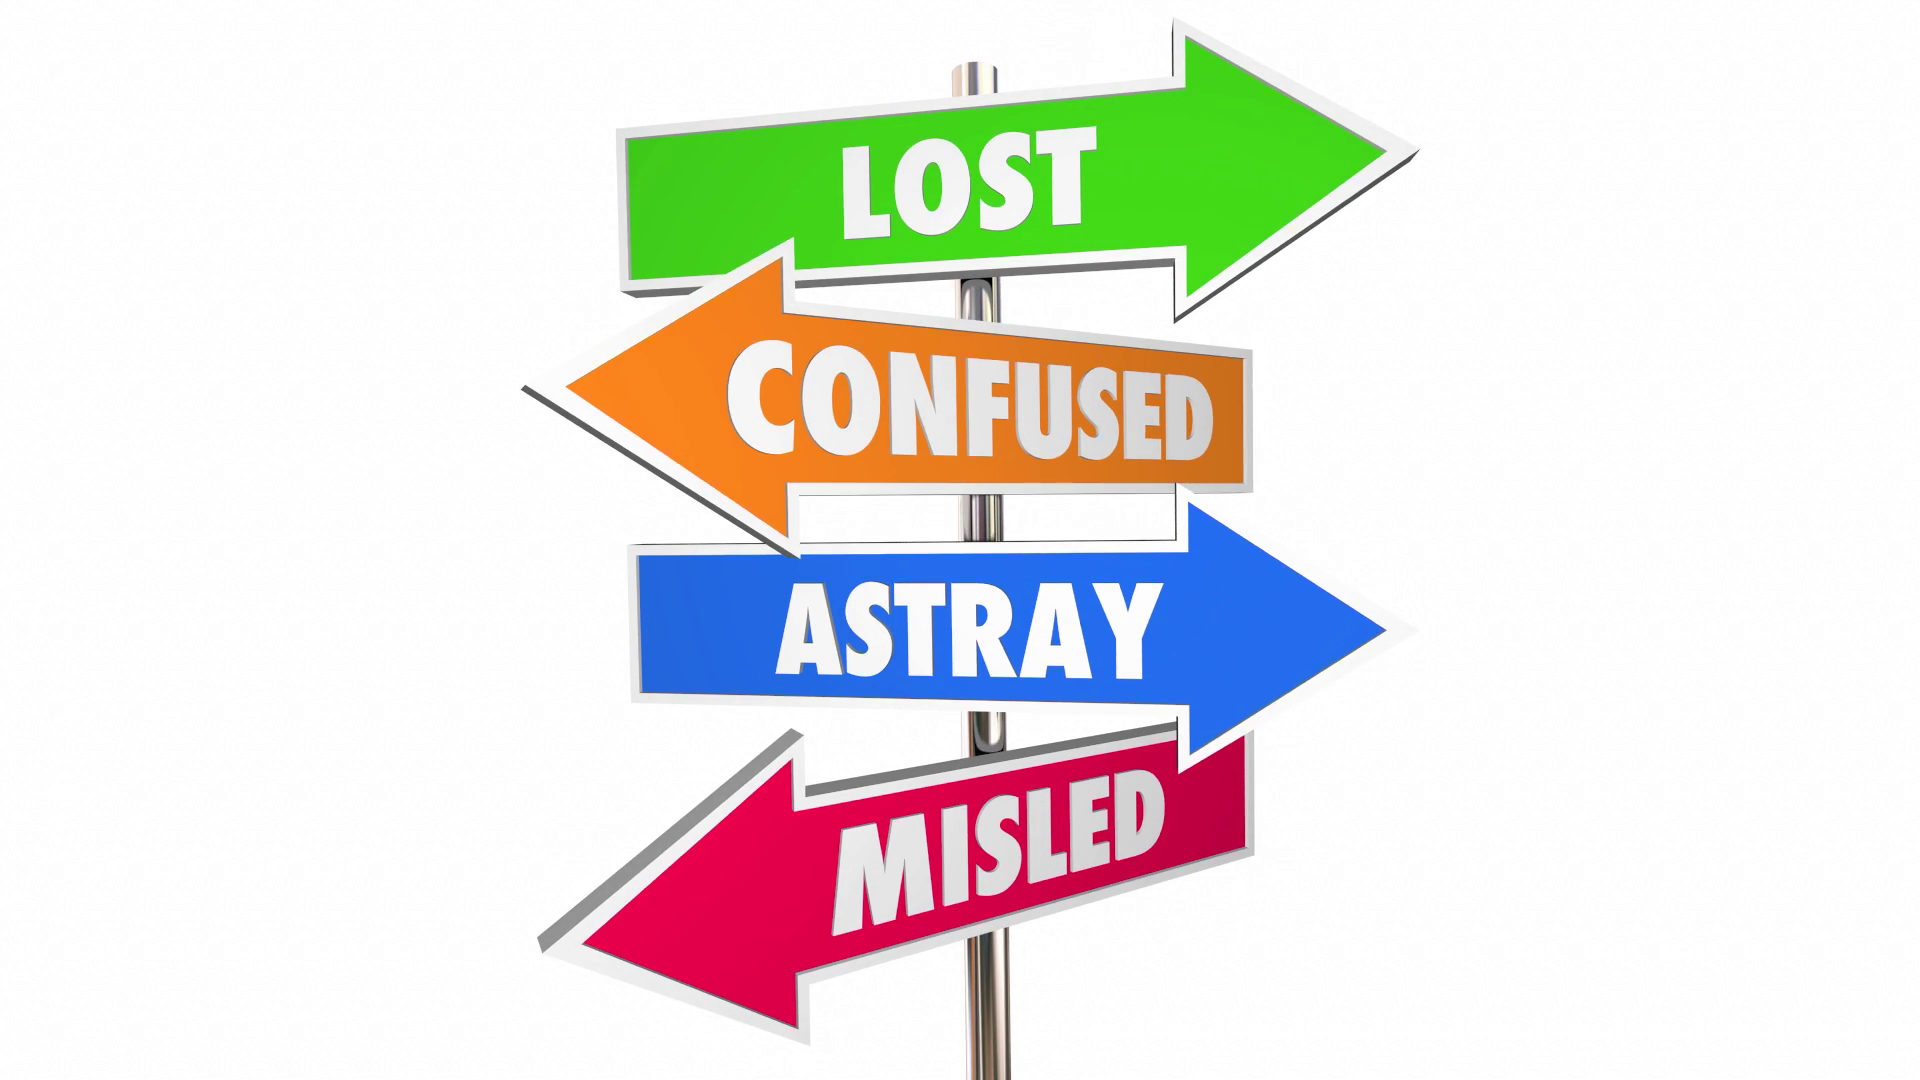 Lost Confused Astray Misled 4 Arrow Road Signs 3 D Animation Motion Background   Videoblocks - Road Sign, Transparent background PNG HD thumbnail